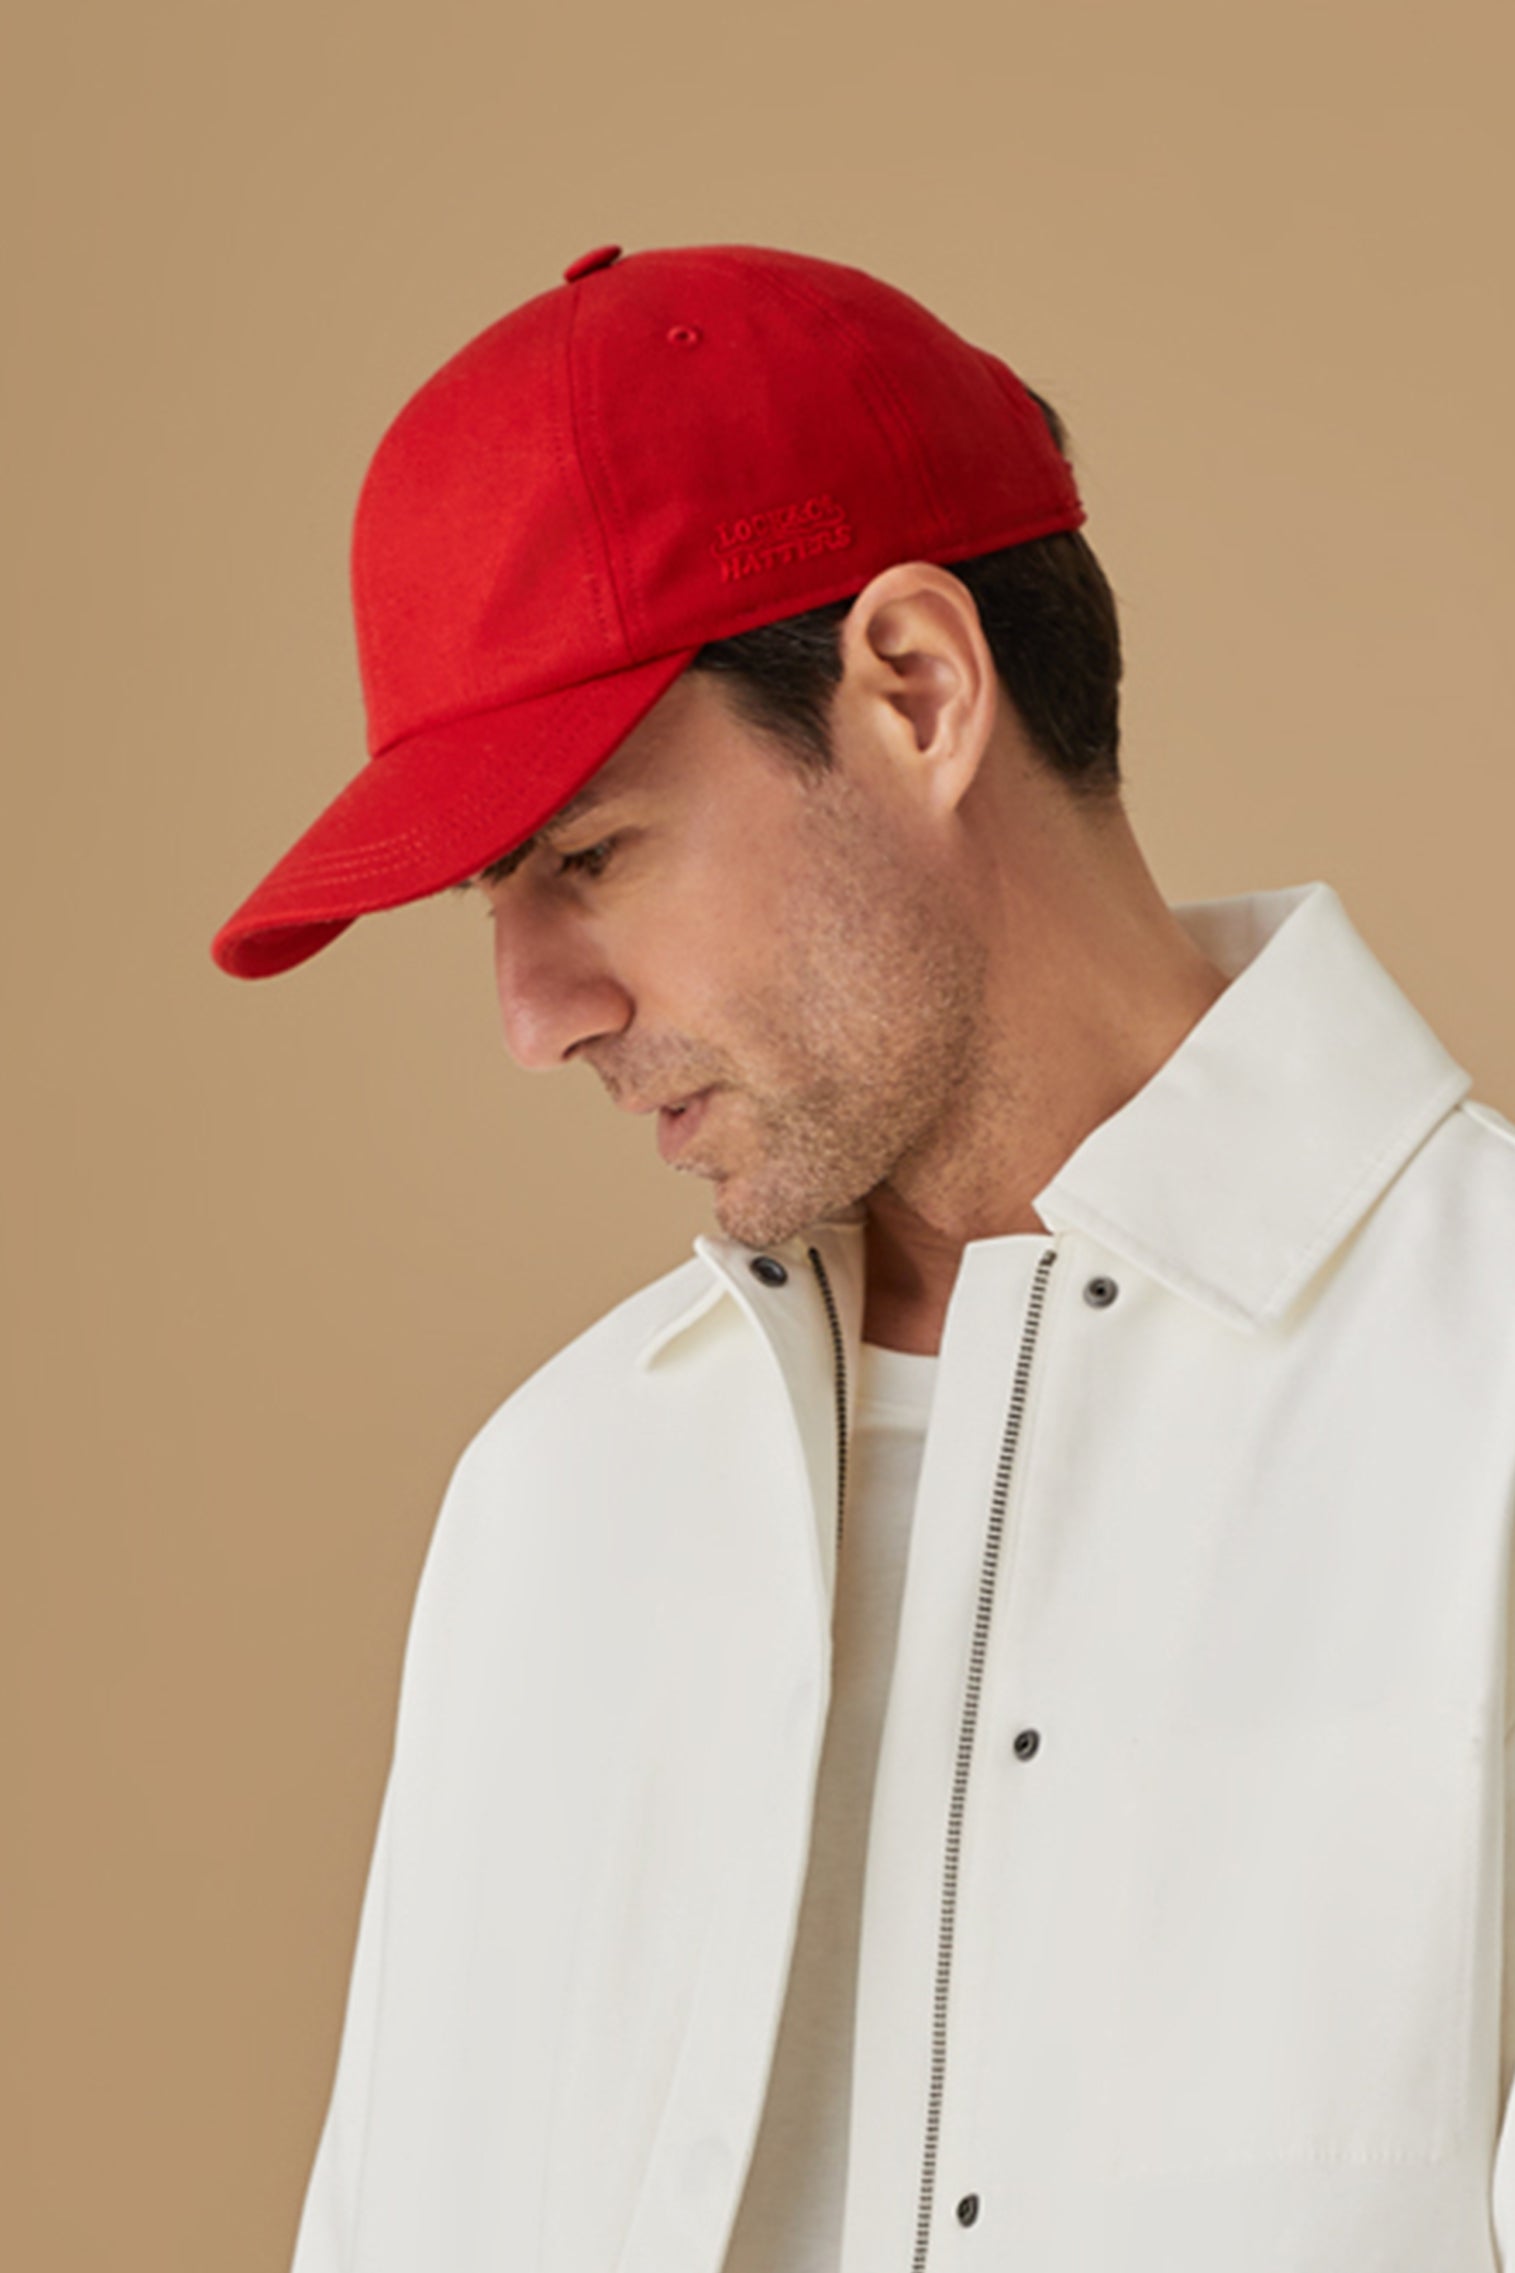 Adjustable Red Baseball Cap - Products - Lock & Co. Hatters London UK